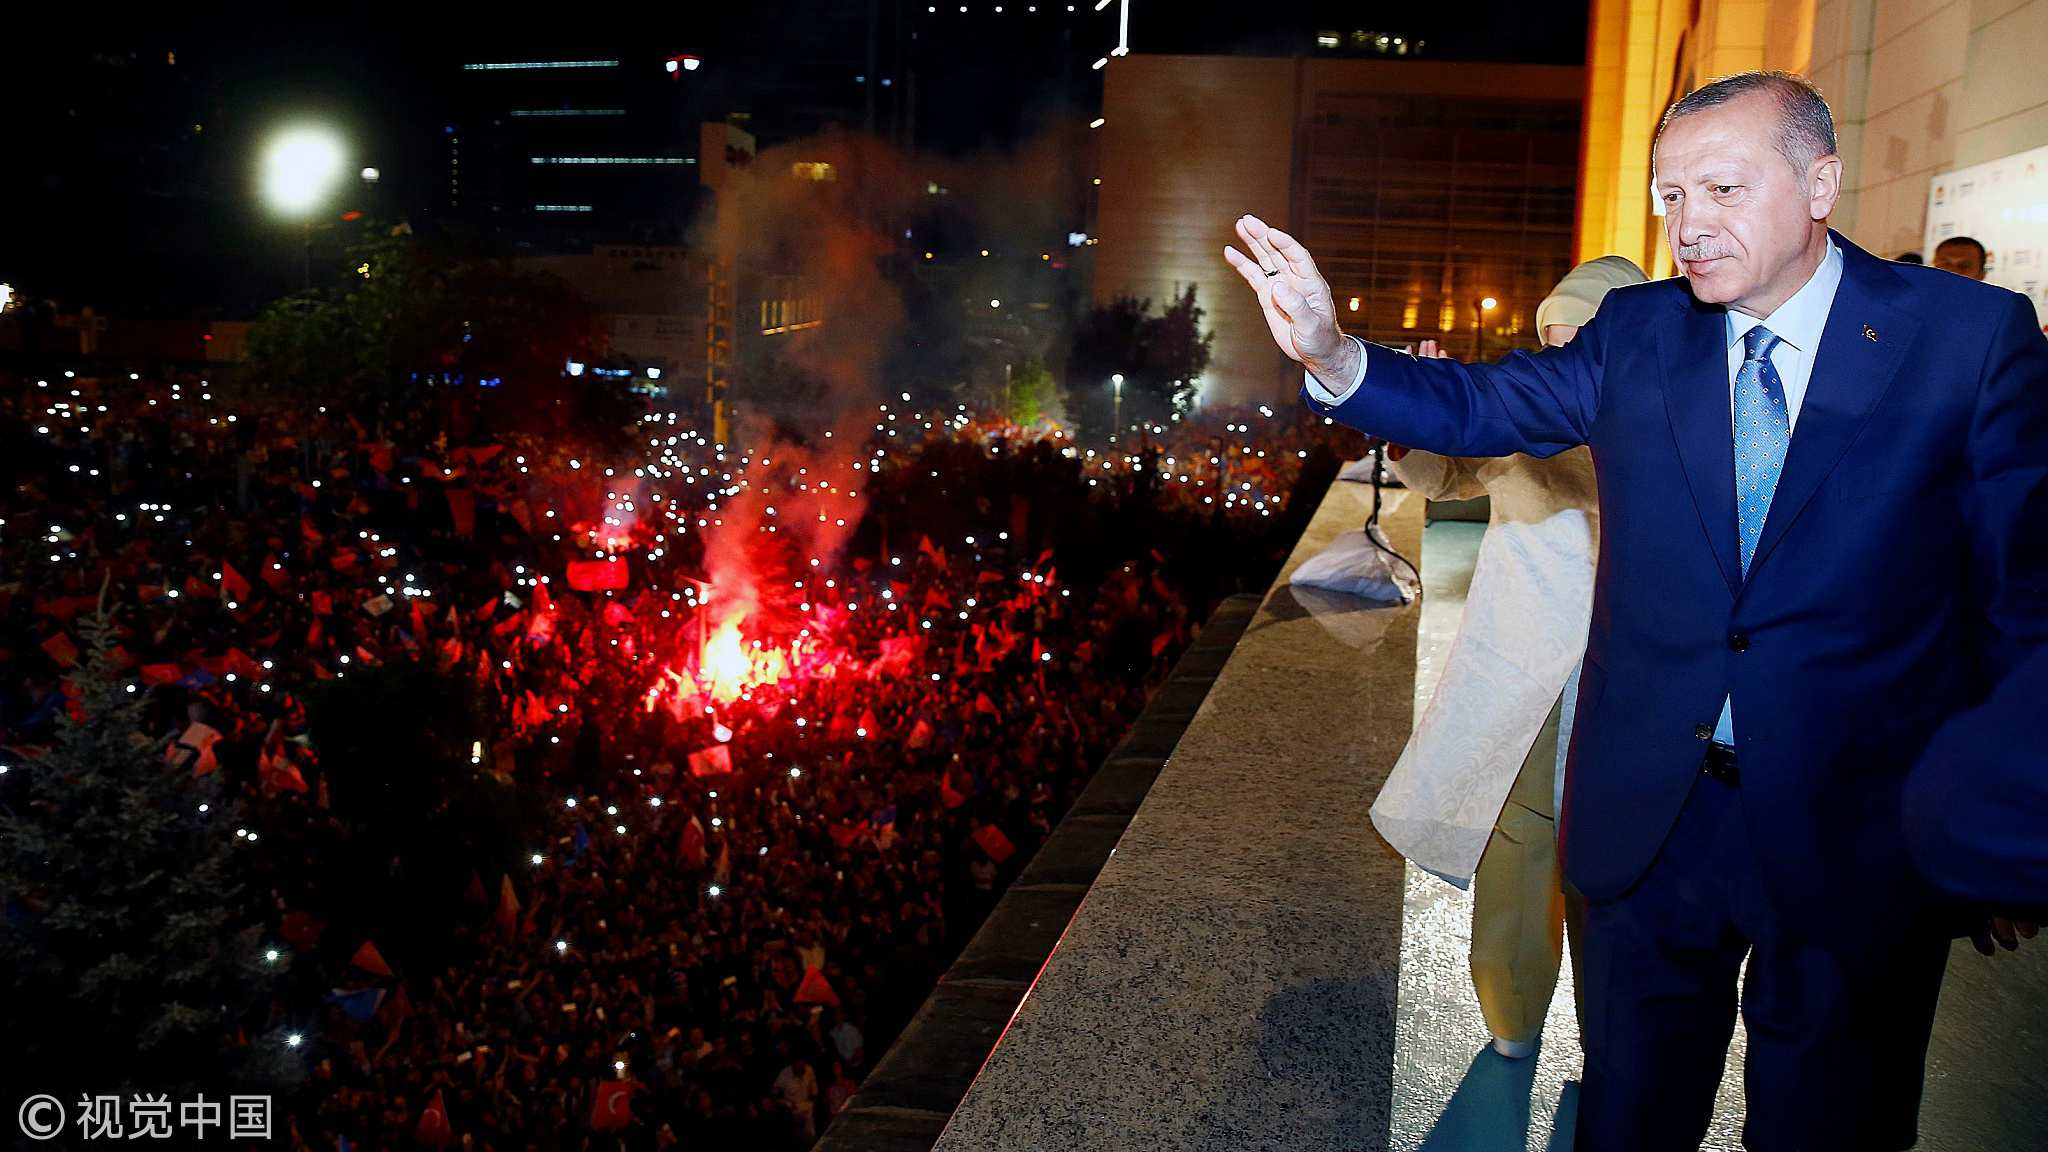 Erdogan will return to the presidential palace with even greater powers